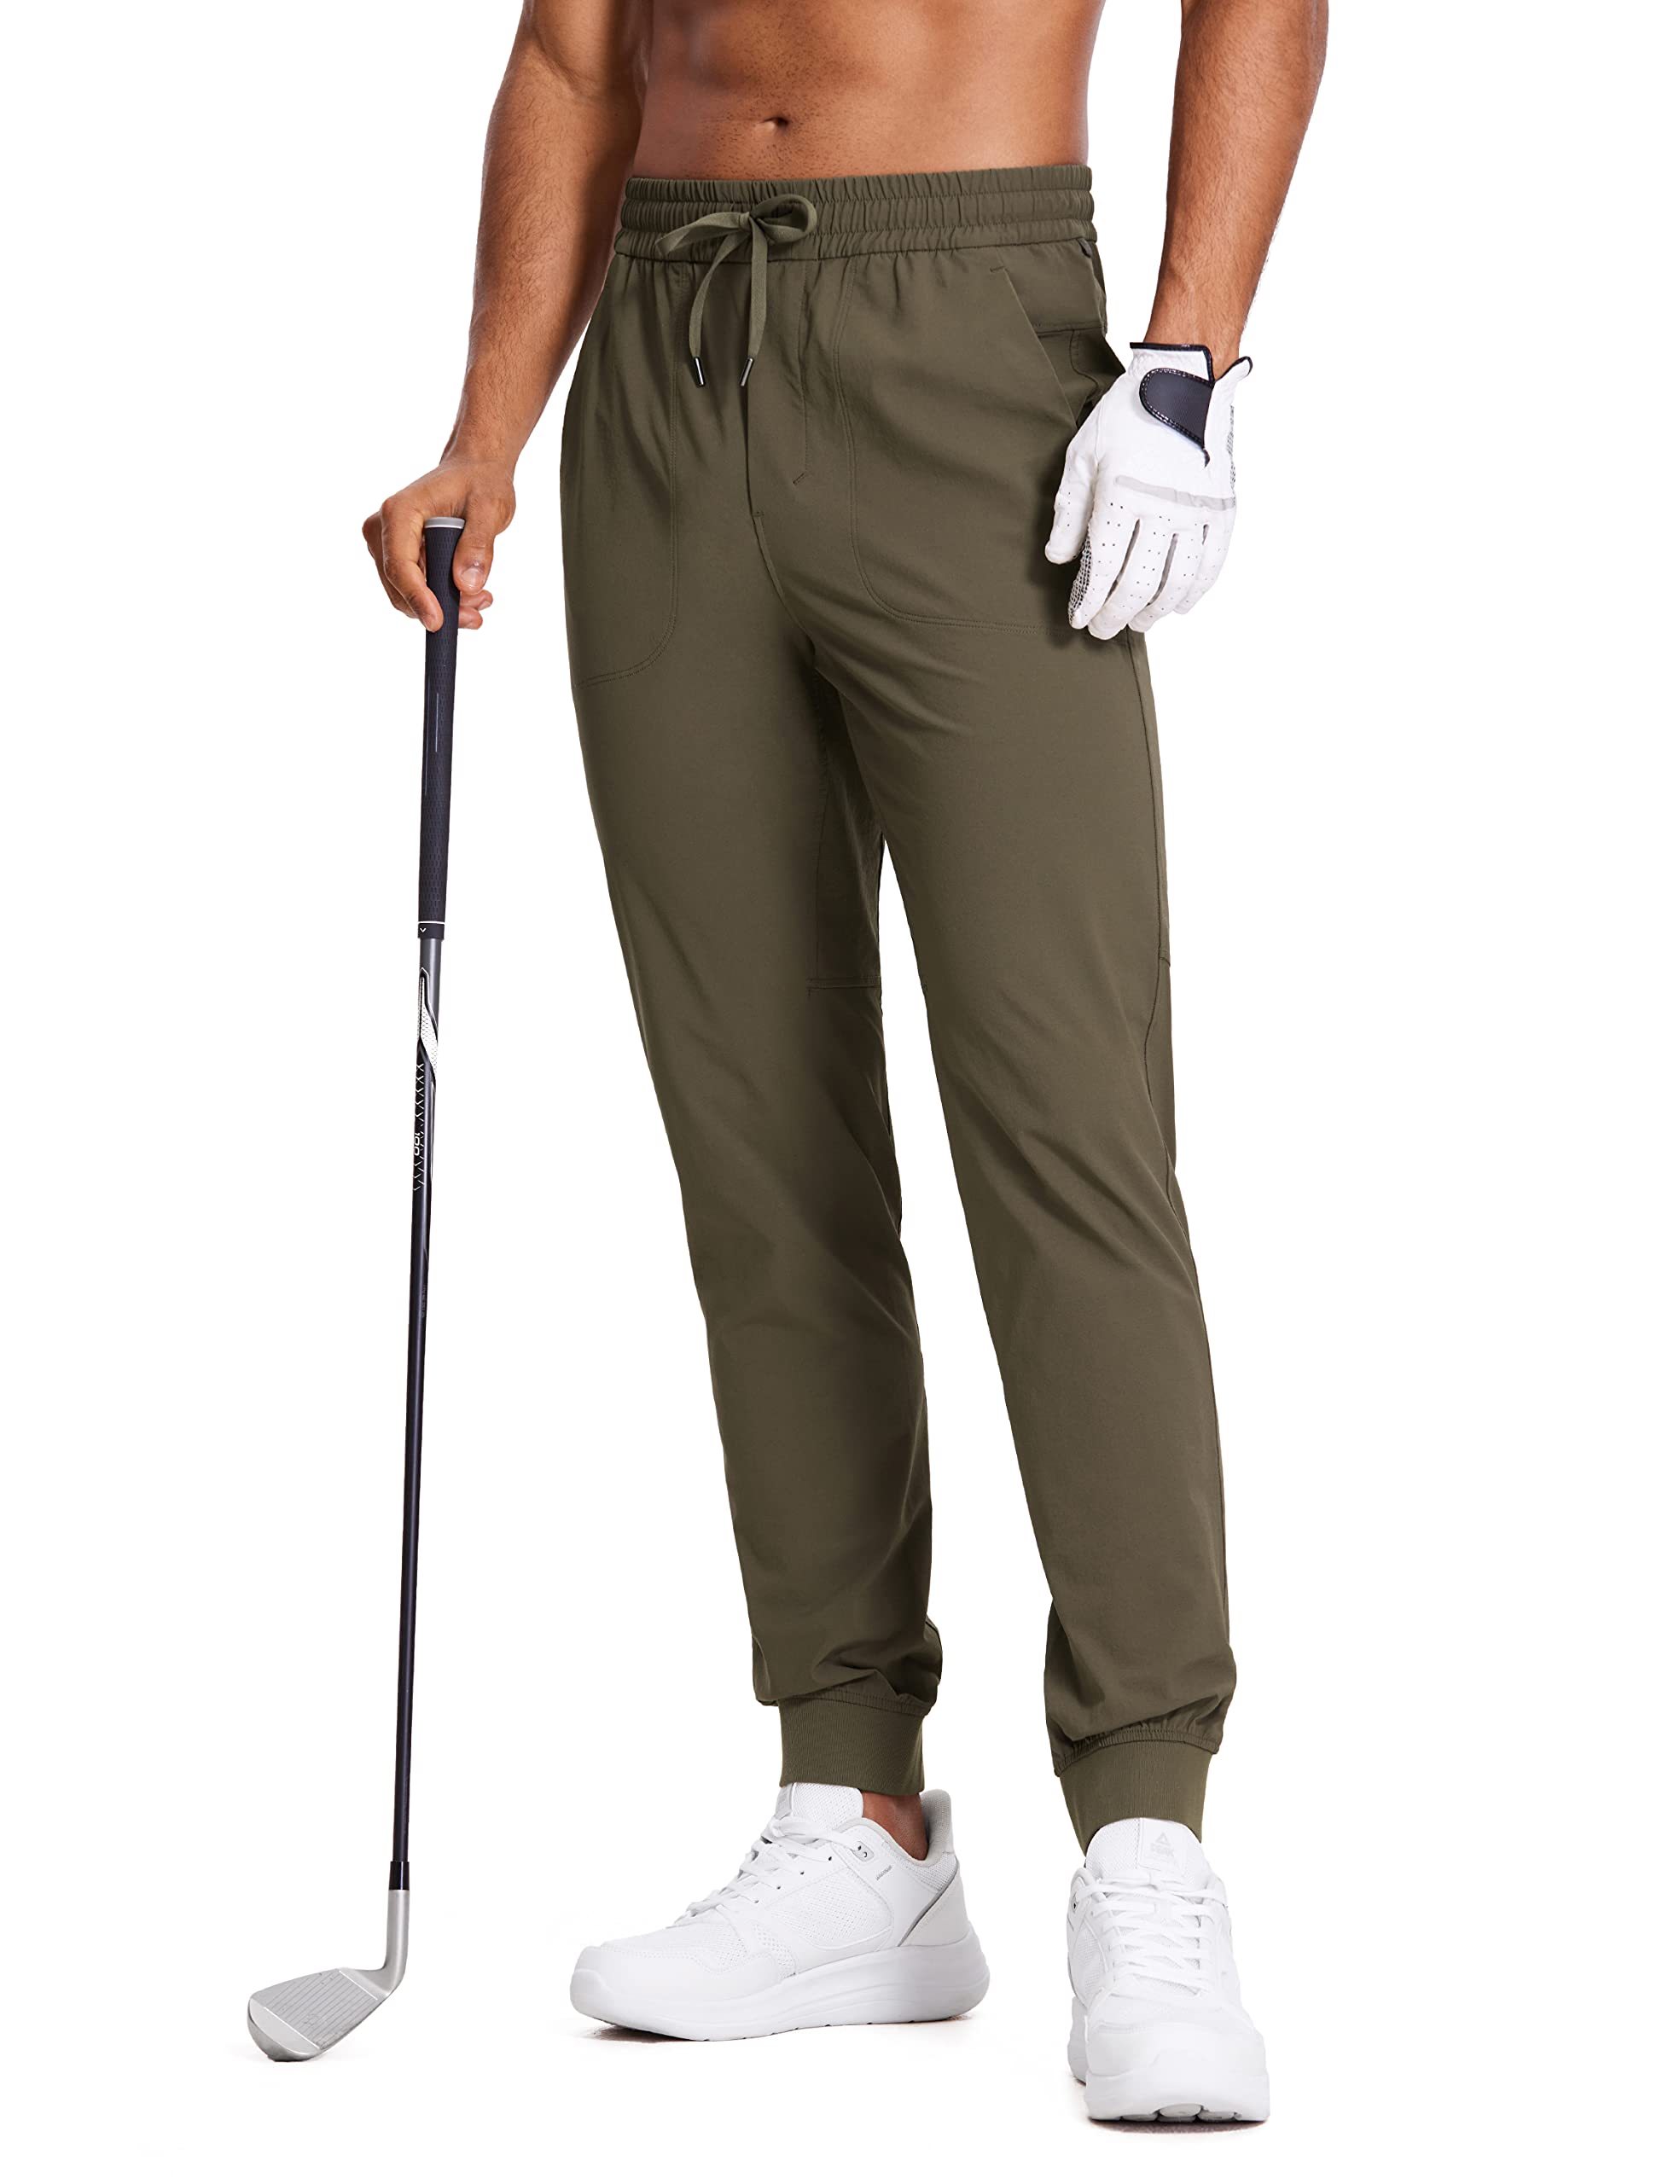 CRZ YOGA Mens Work Classic Fit All-Day Comfort Golf Pants Pockets 34